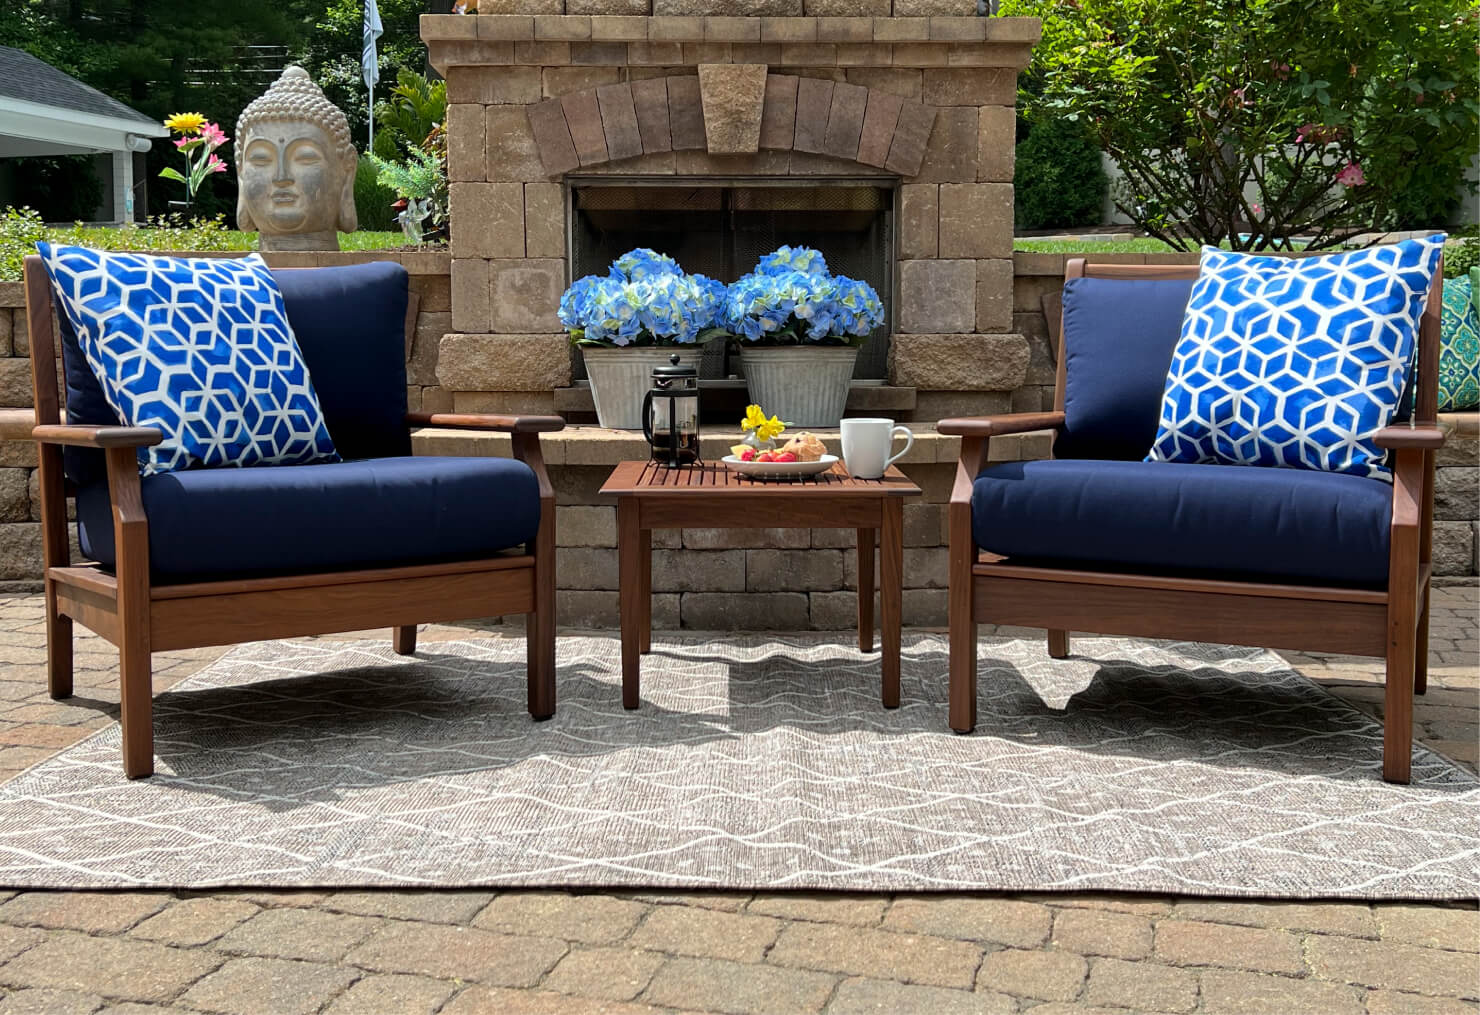 Outdoor seating area with two chairs, a fireplace, and decorative elements.